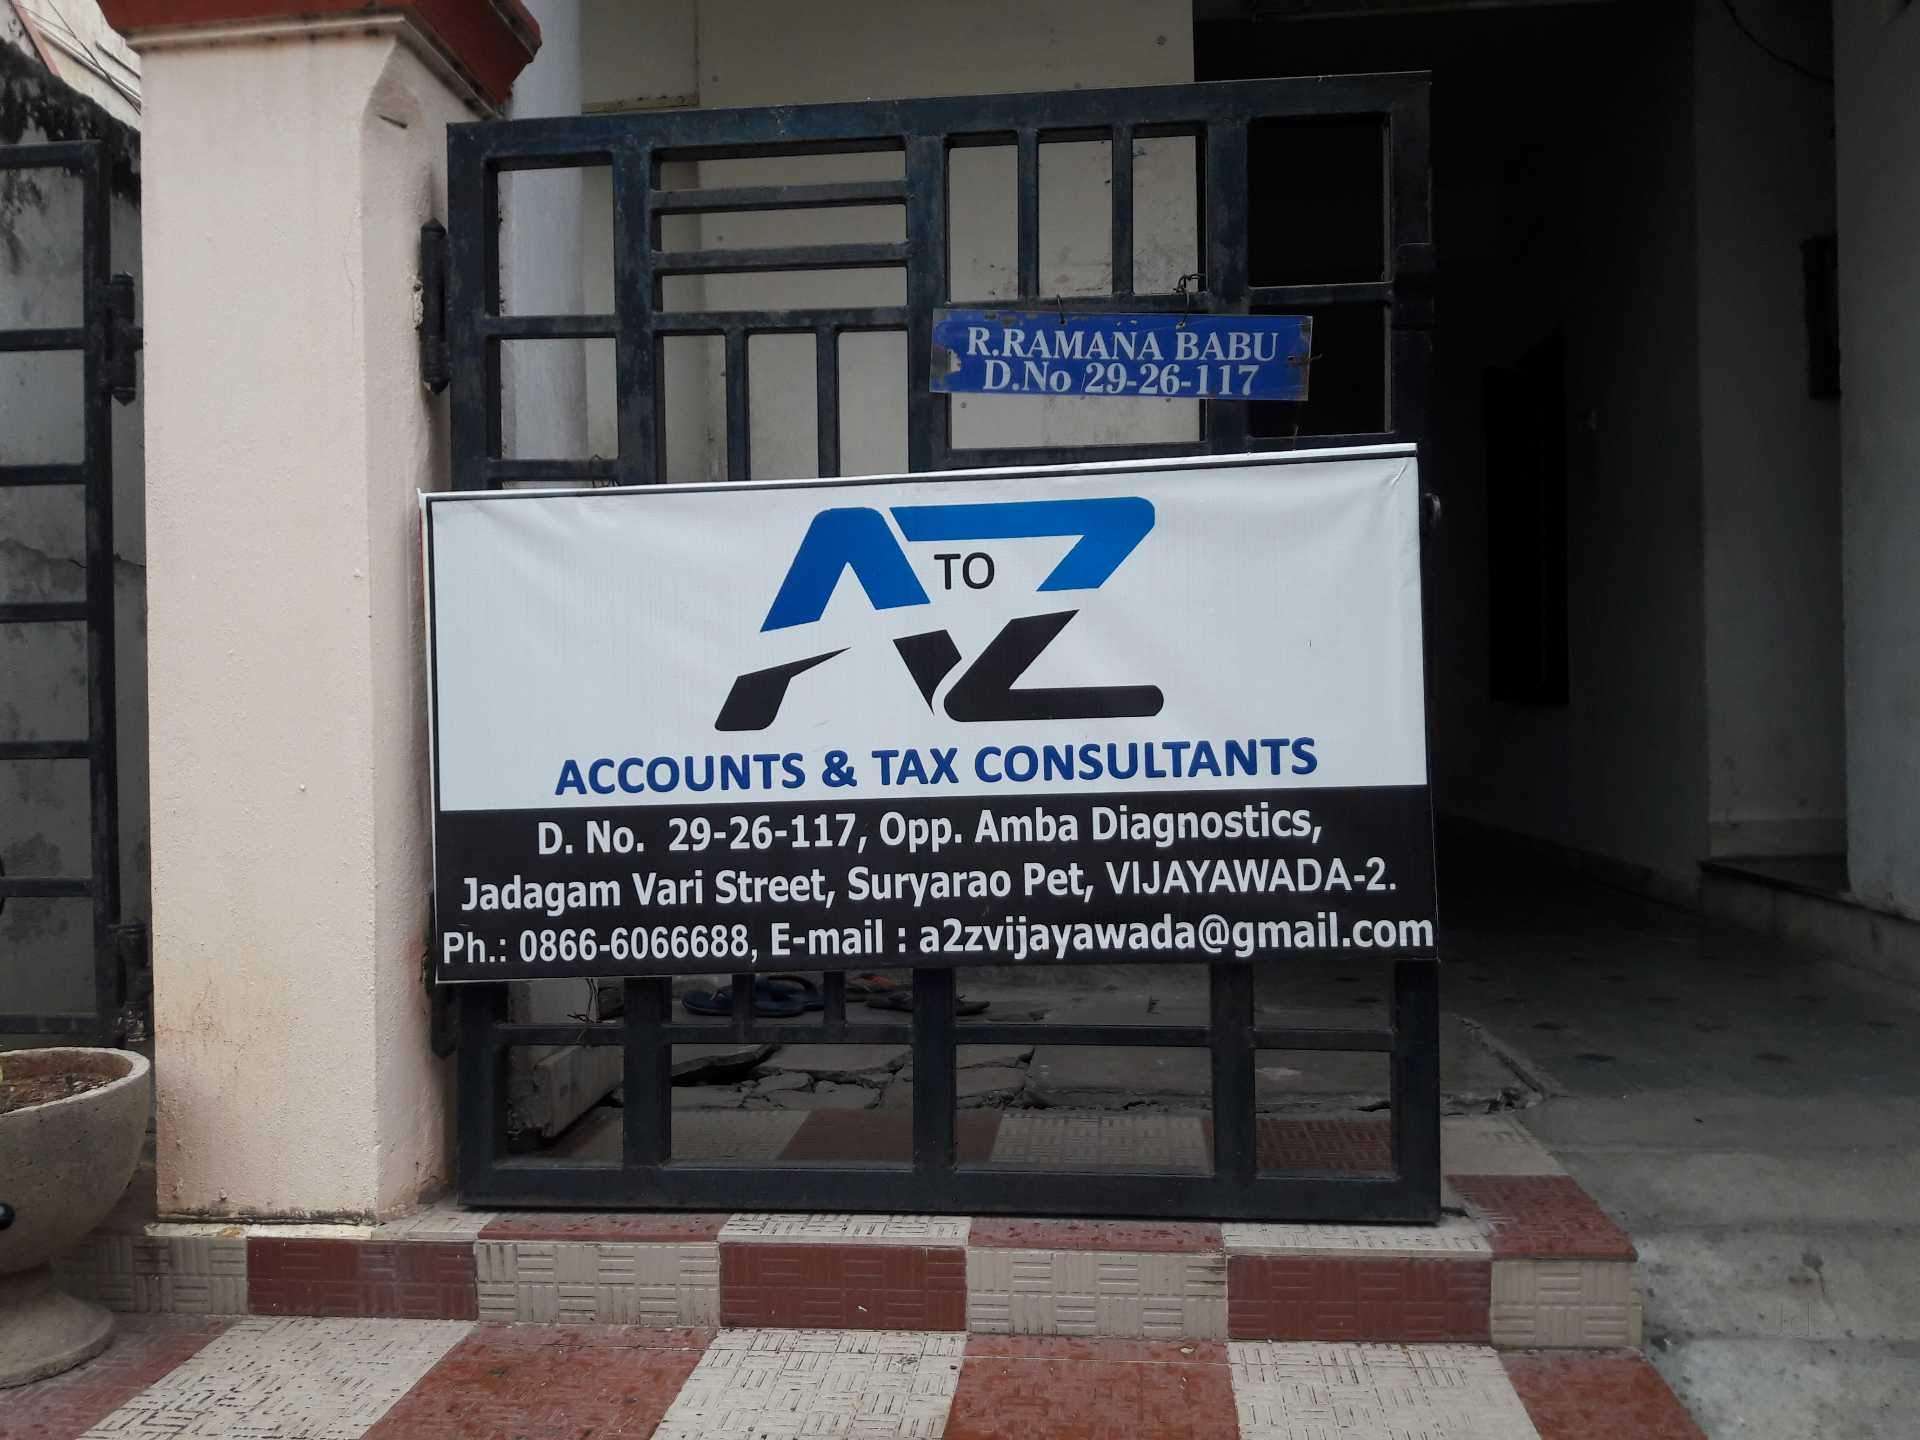 A To Z Accouts And Tax Consulatnts